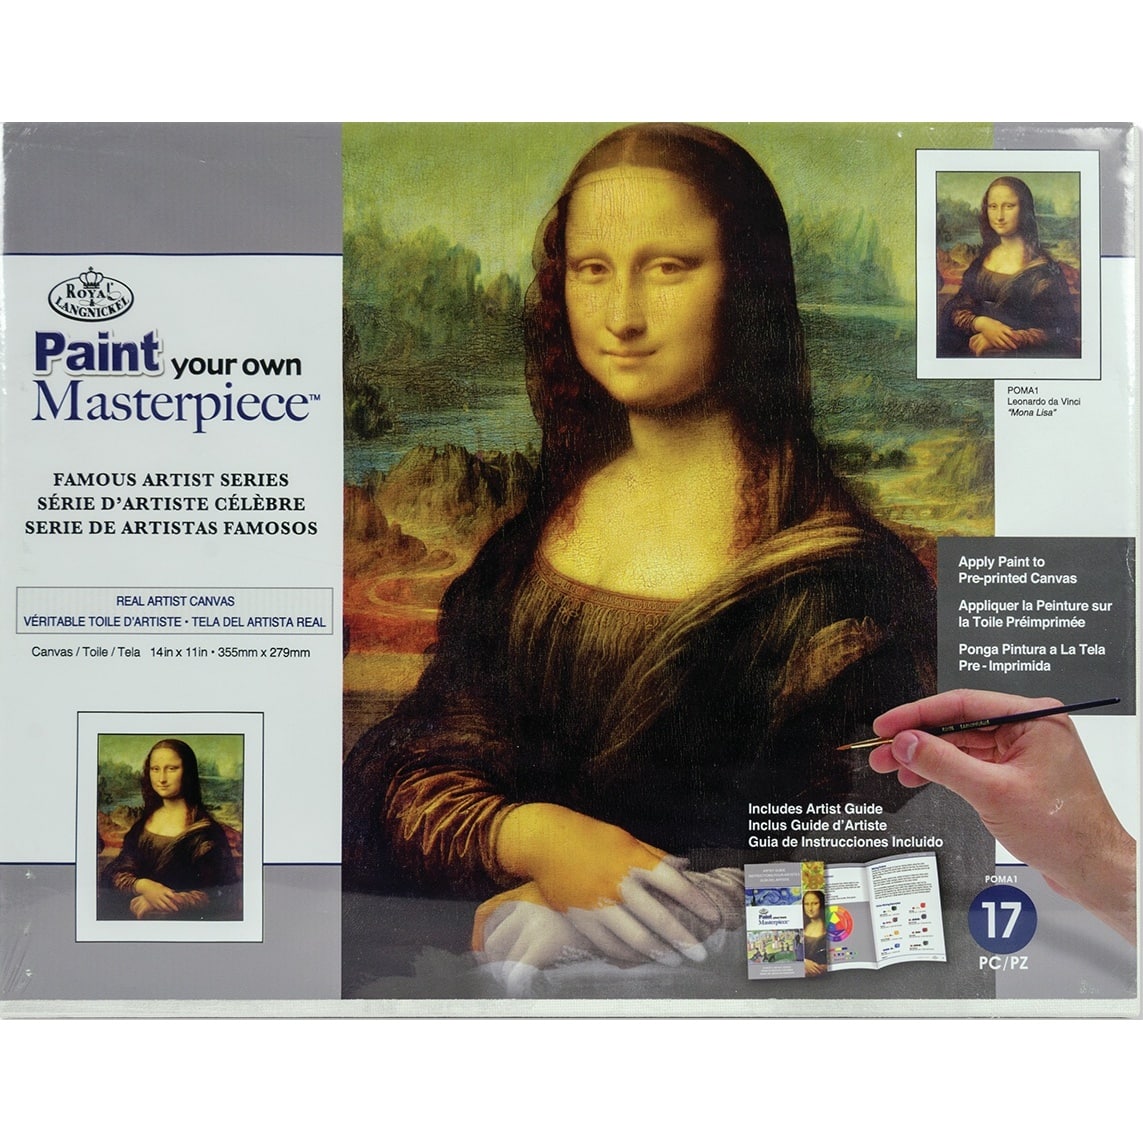 Diamond Painting Kits: Build Your Own Masterpiece With These Kits for All  Levels